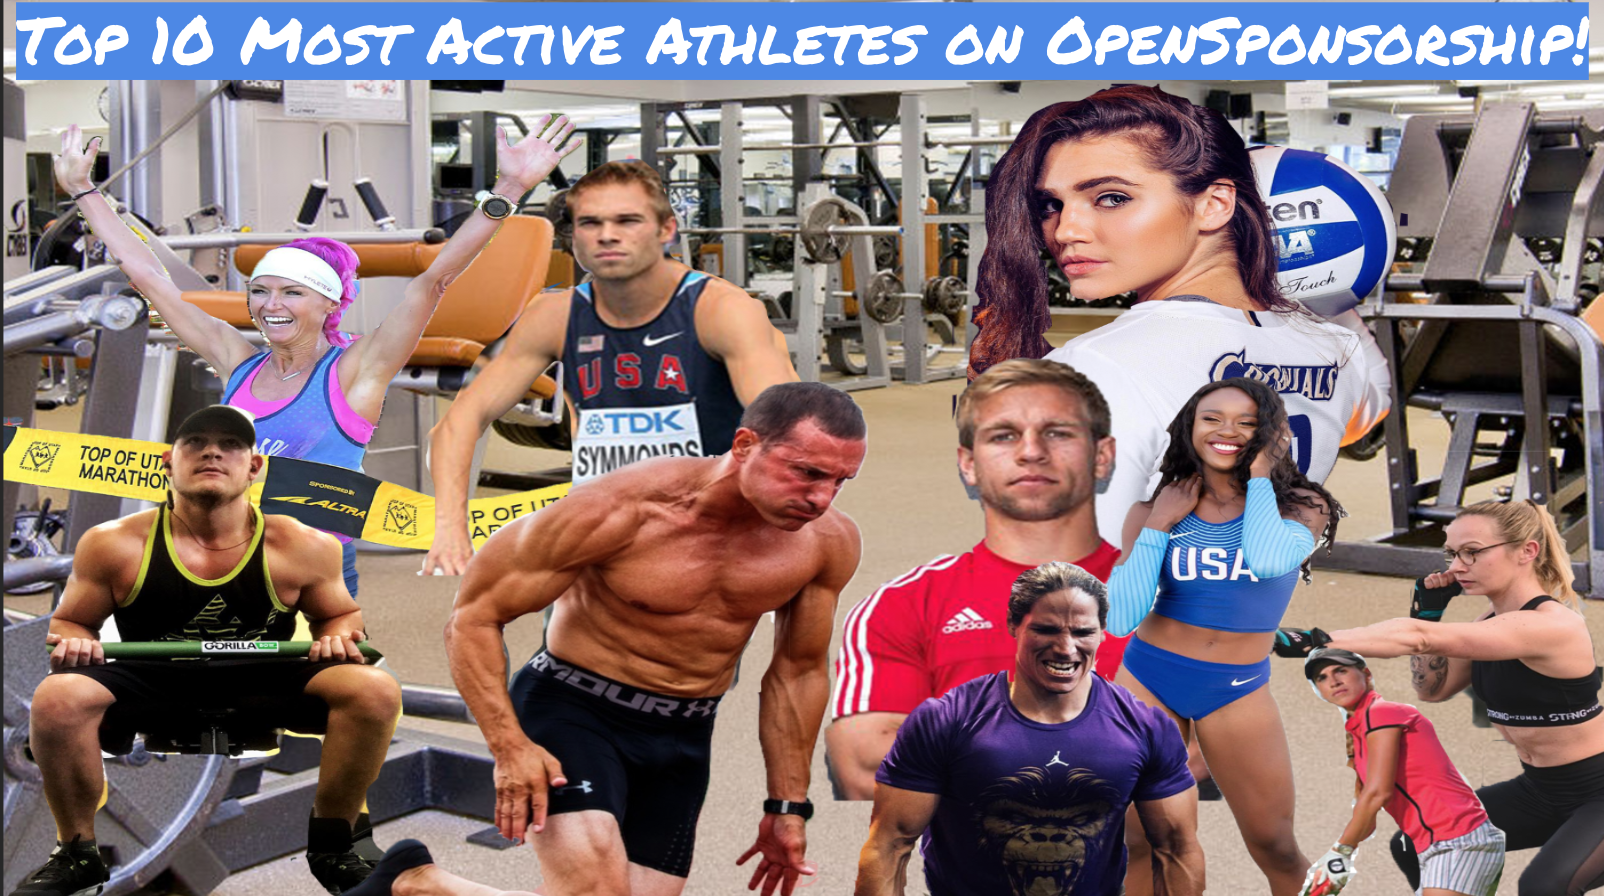 @brandonzingale's cover photo for '10 Most Active Athletes on OpenSponsorship'